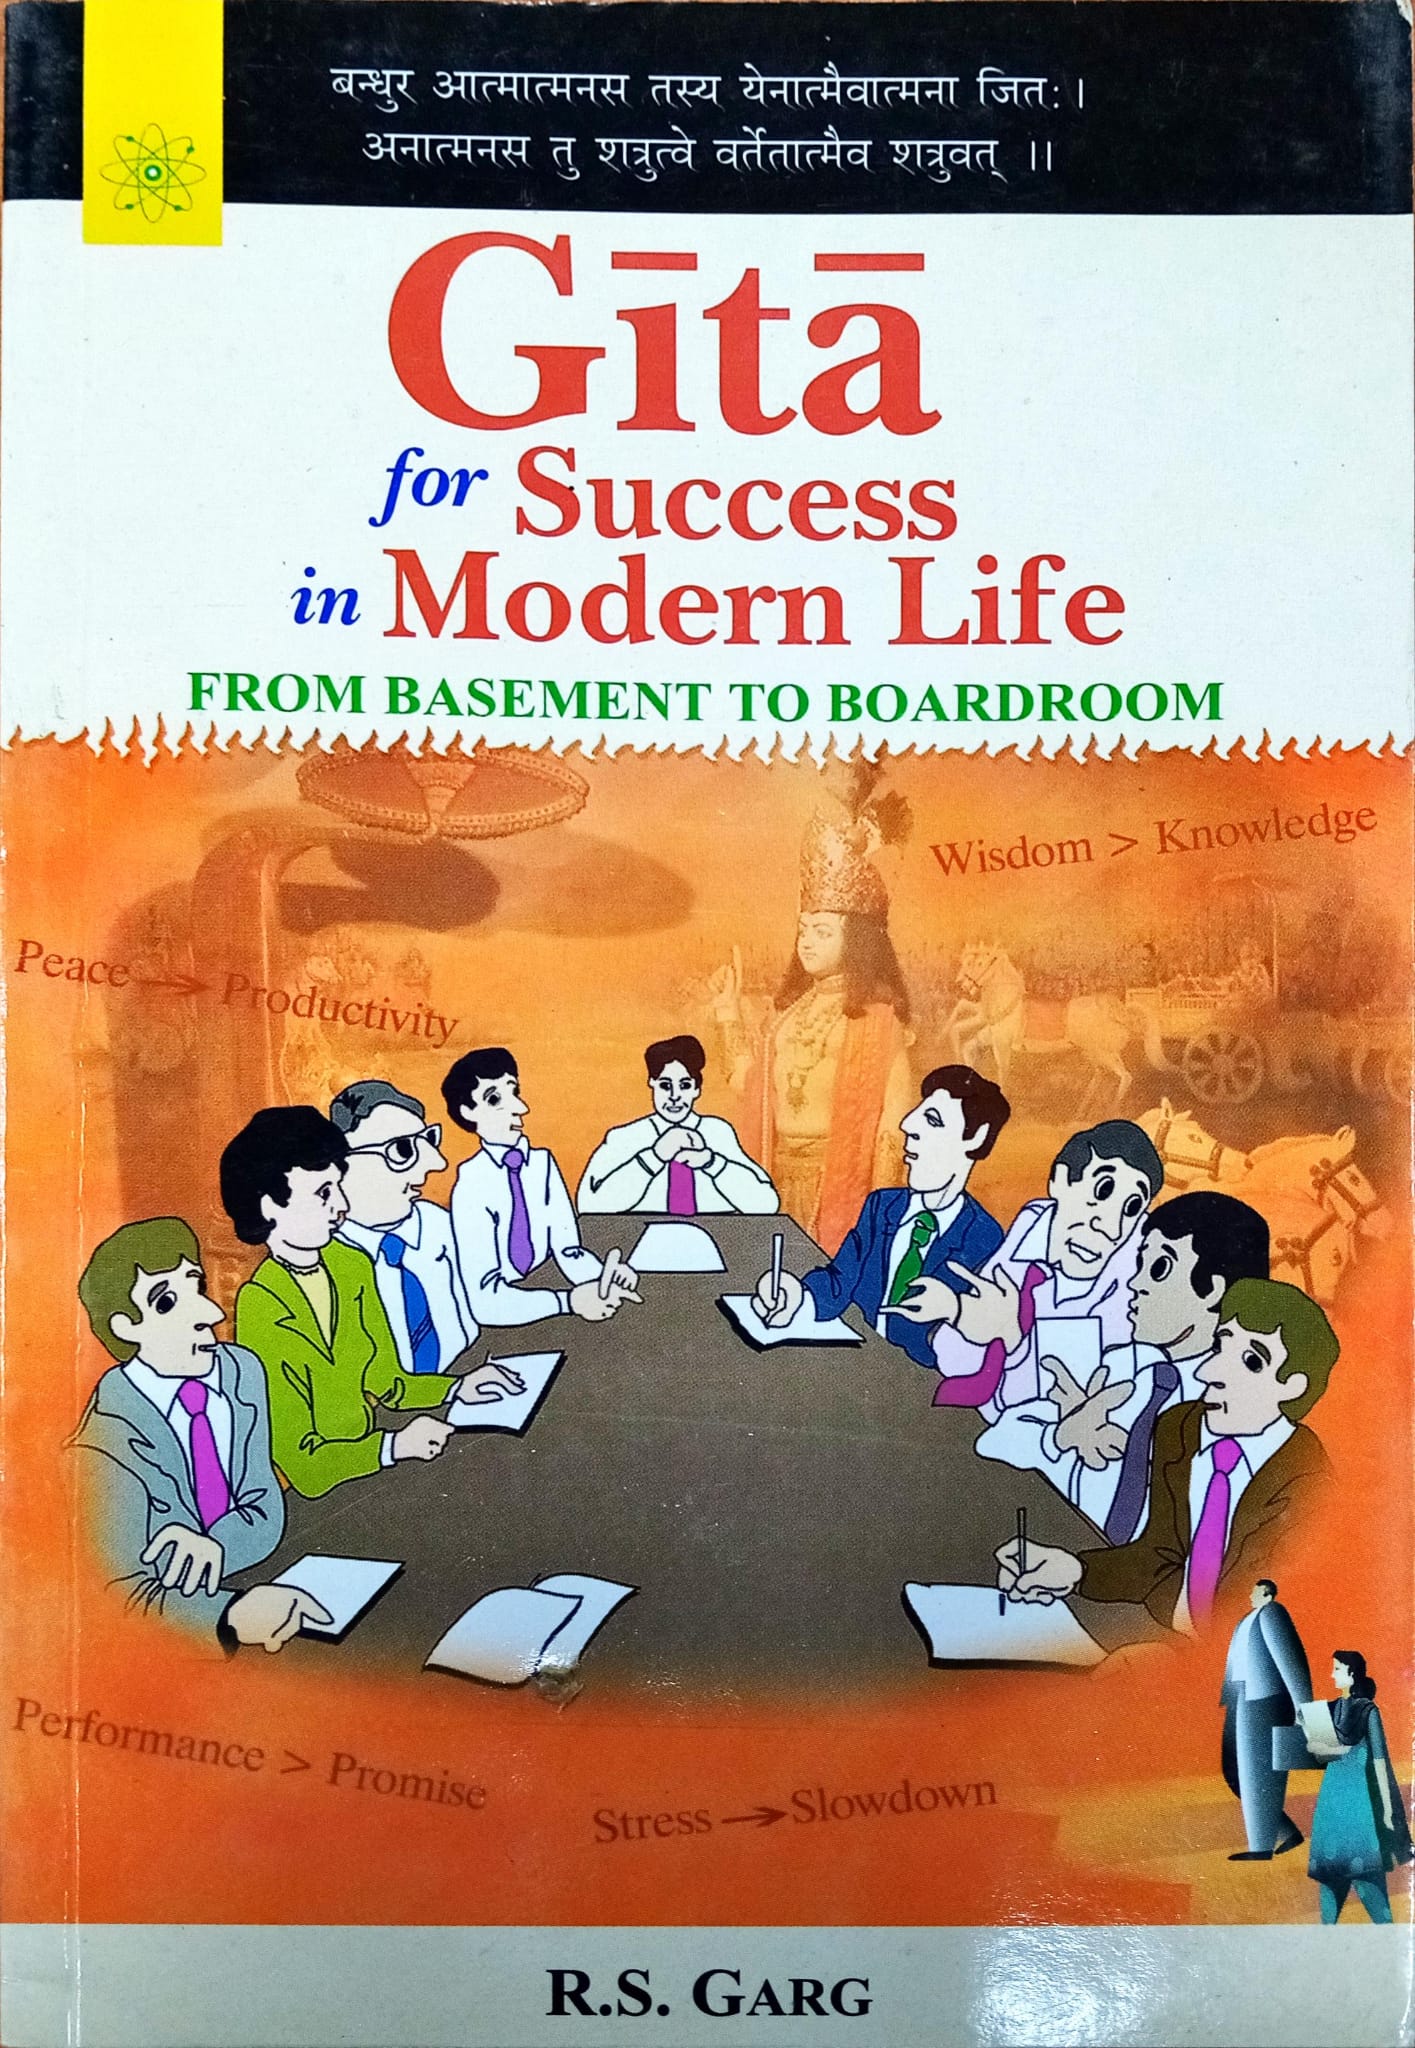 Gita for Success in Modern Life From Basement to Boardroom